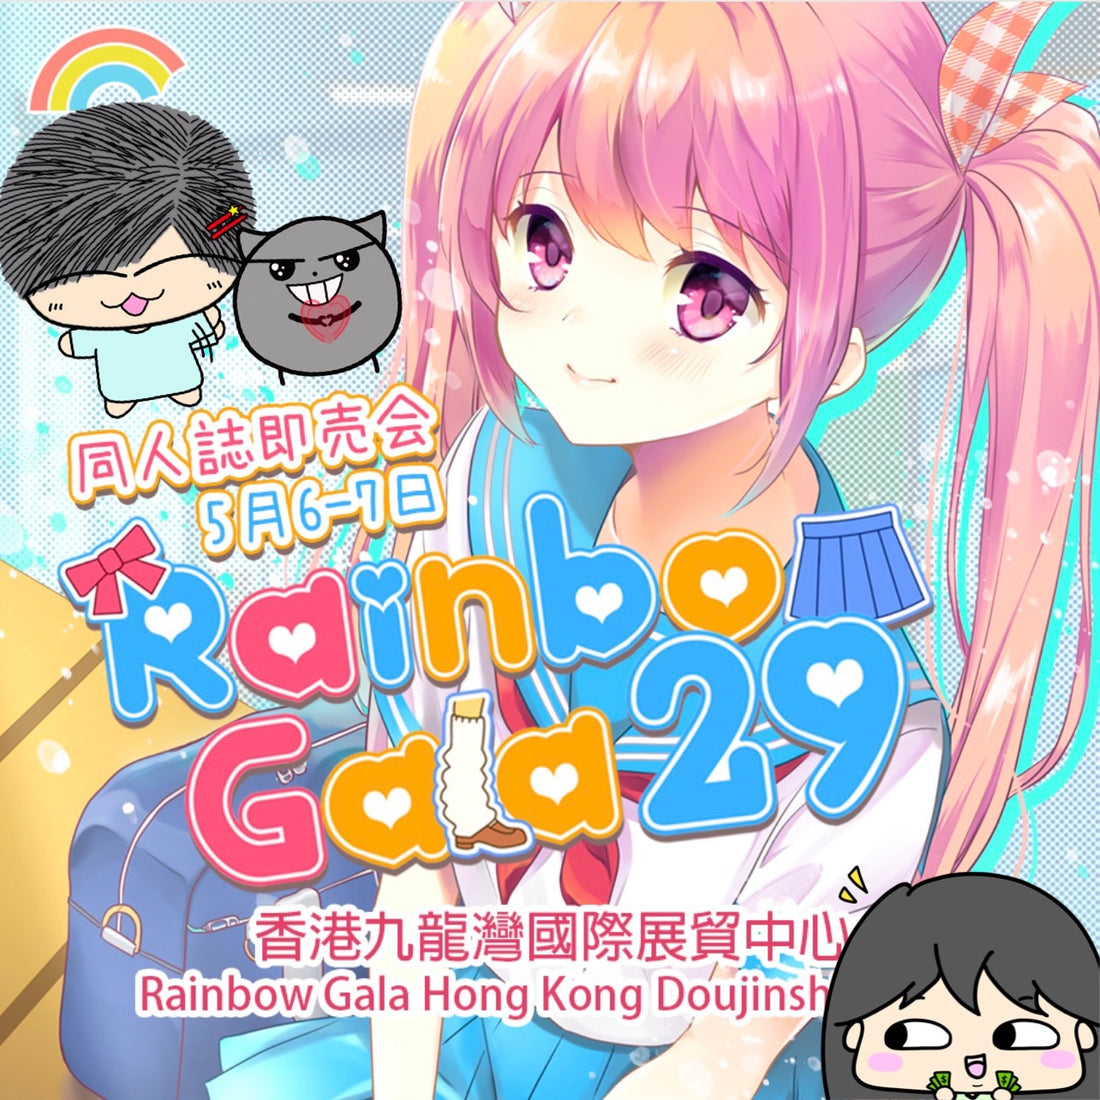 💖We are going to join Rainbow Gala 29!!